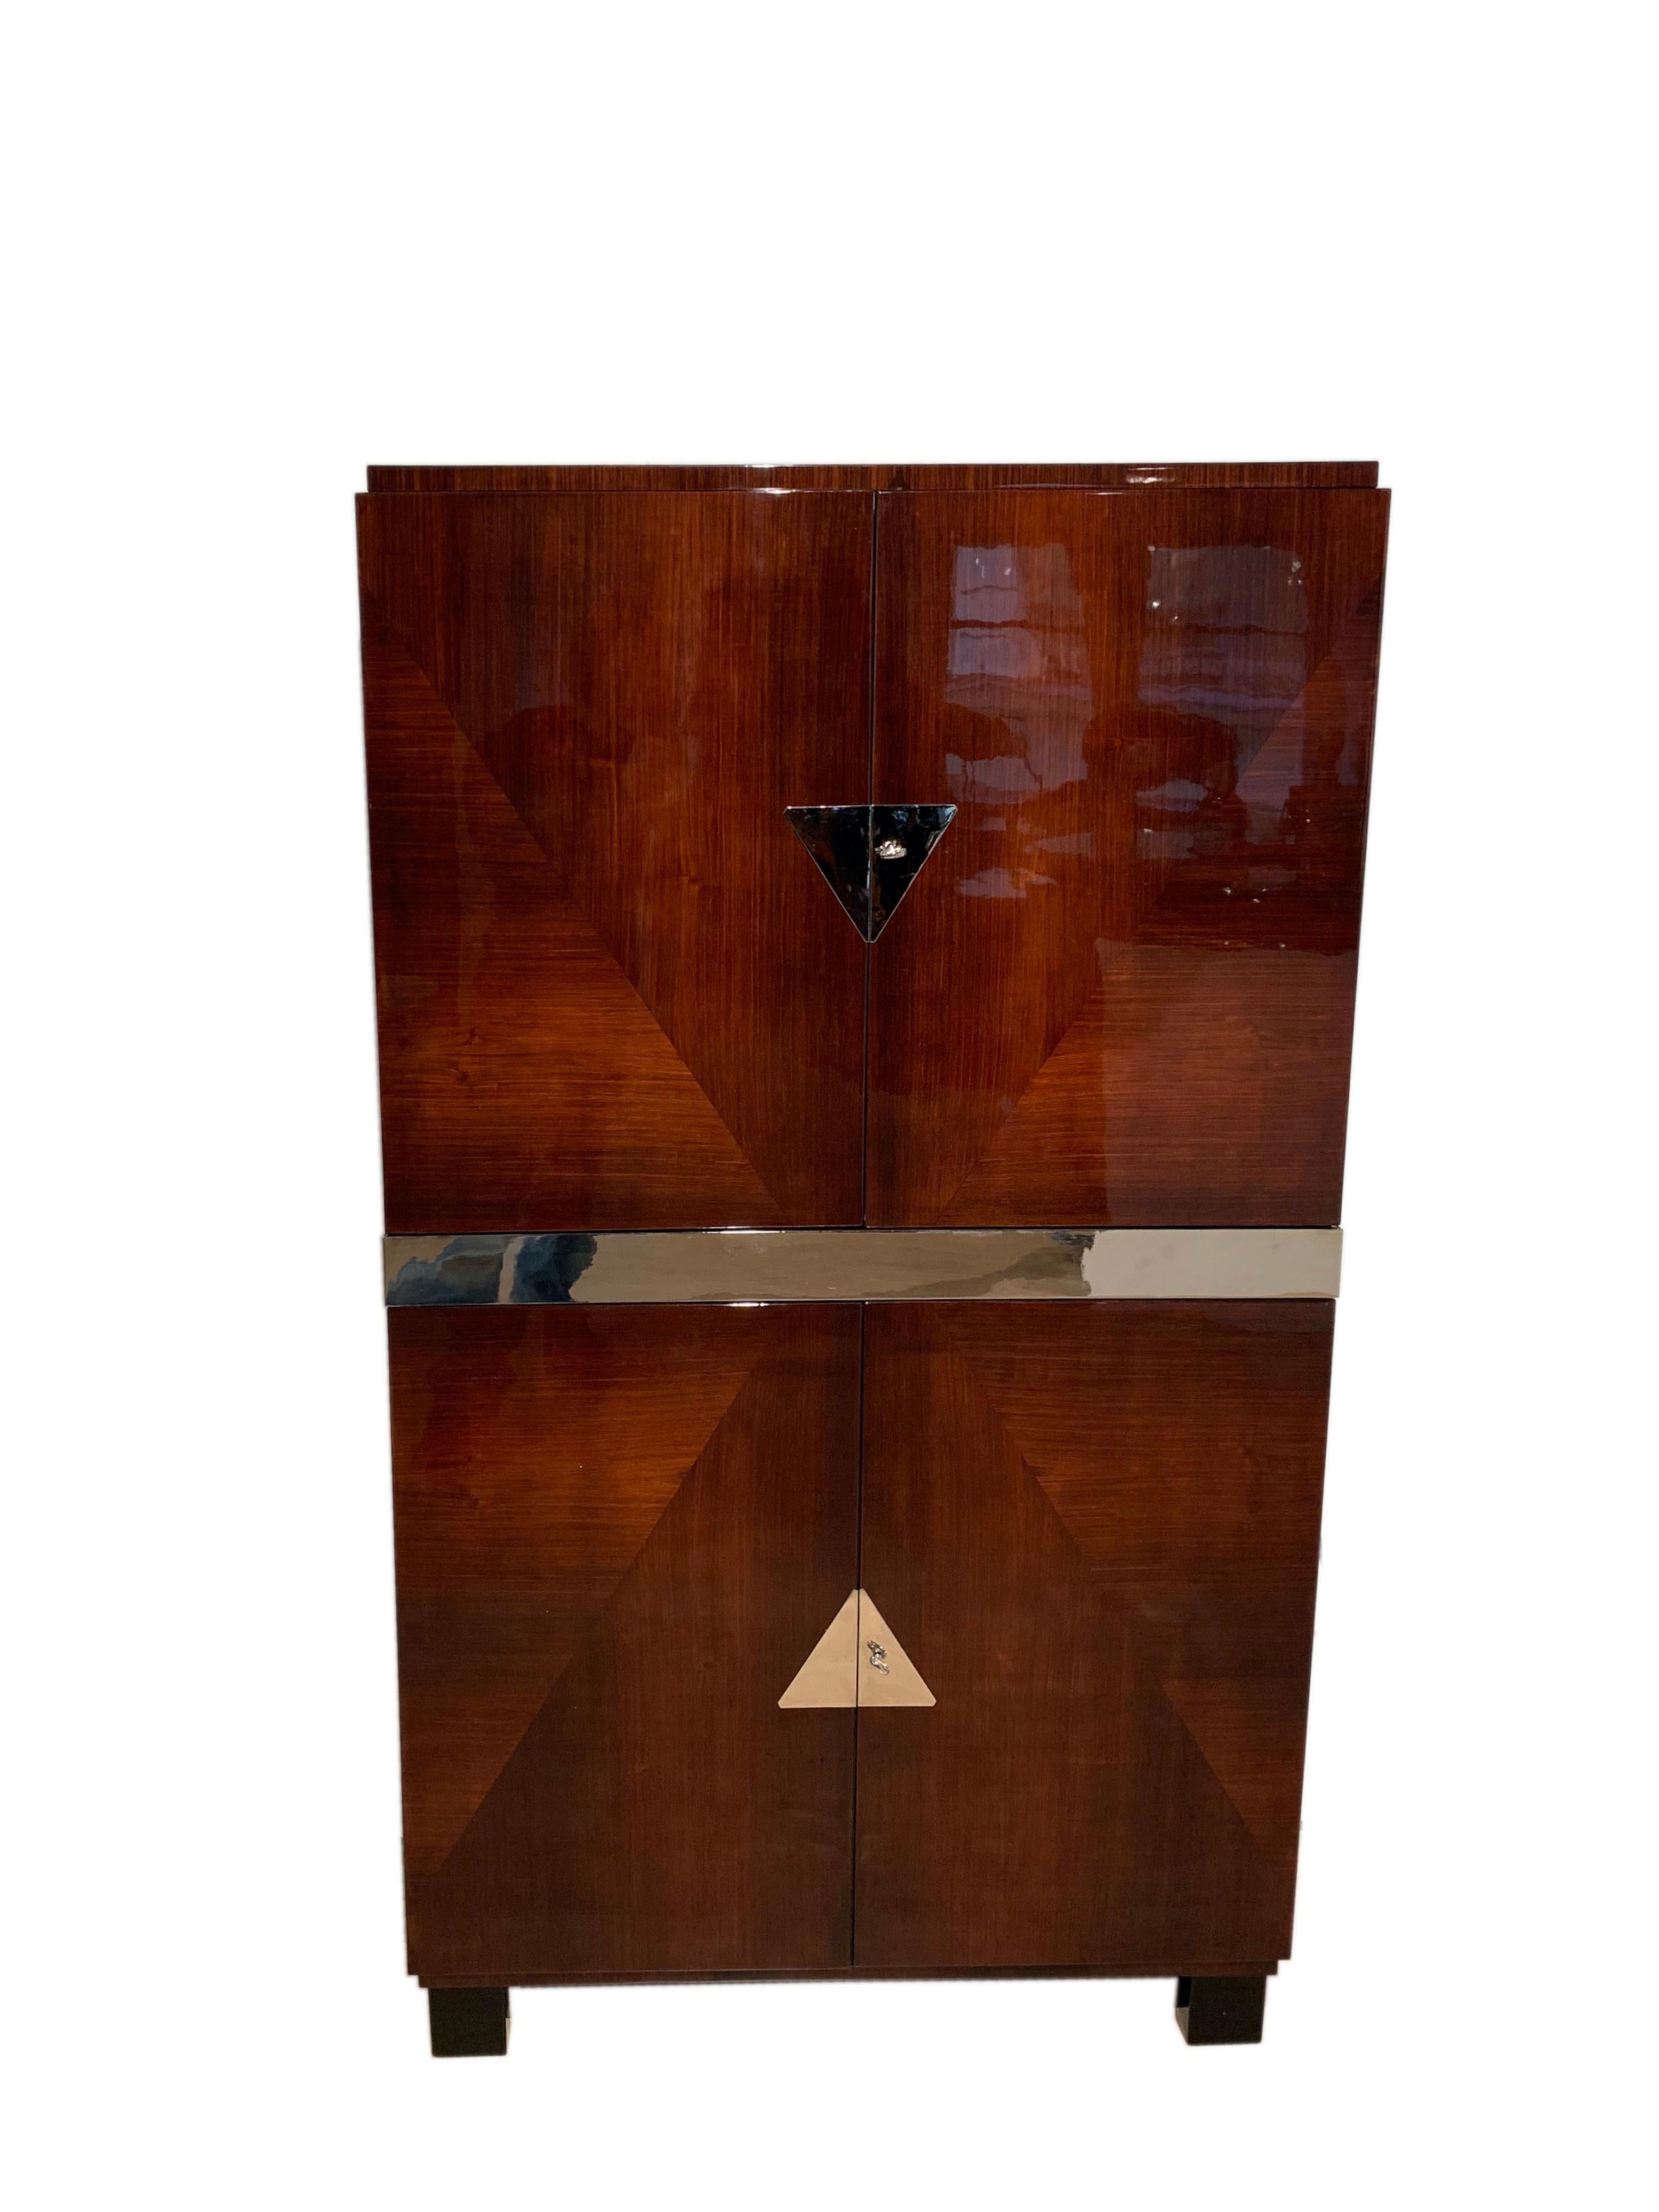 Art Deco bar cabinet, rosewood veneer and nickel, France circa 1940

Wonderful French Art Deco bar cabinet / dry bar in palisander / rosewood veneer and nickel parts from France around 1940.

Rosewood veneered and high-gloss lacquered on the